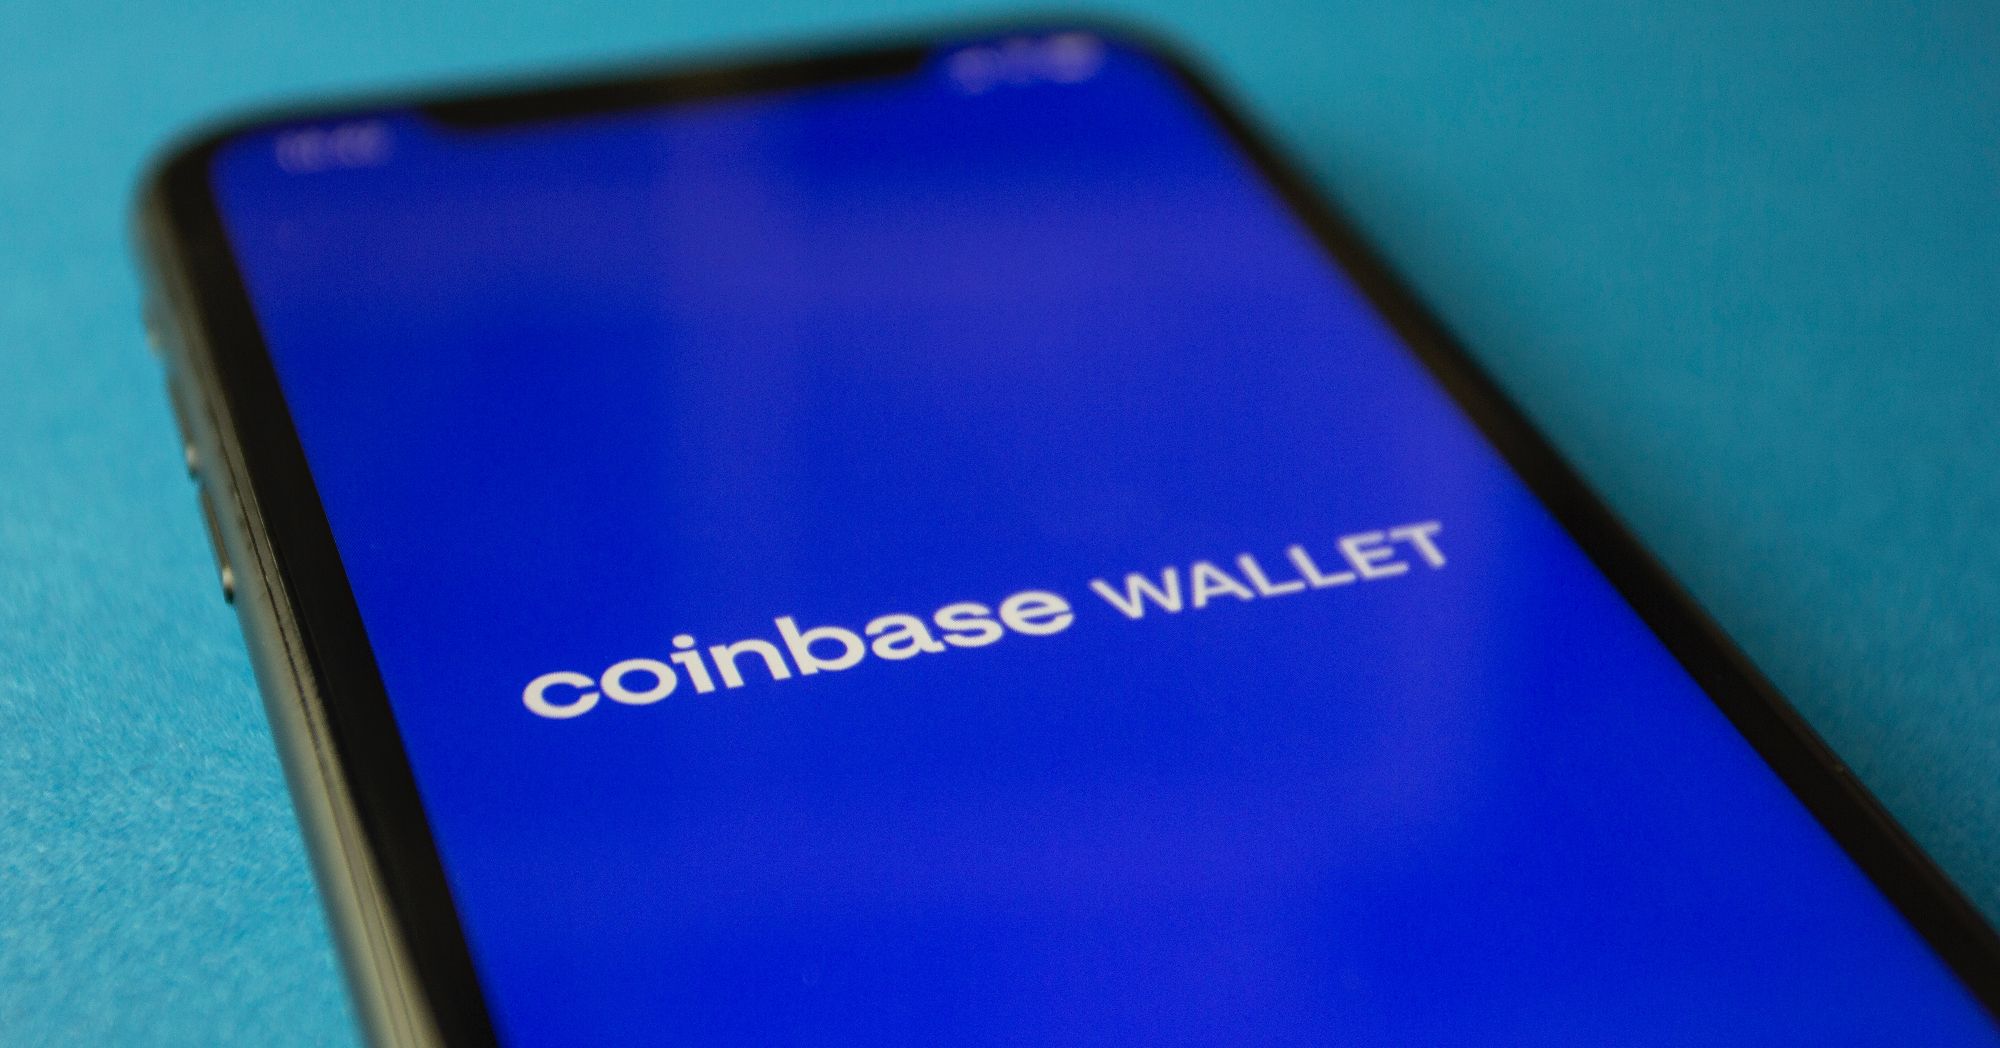 coinbase wallet app displayed on smartphone screen